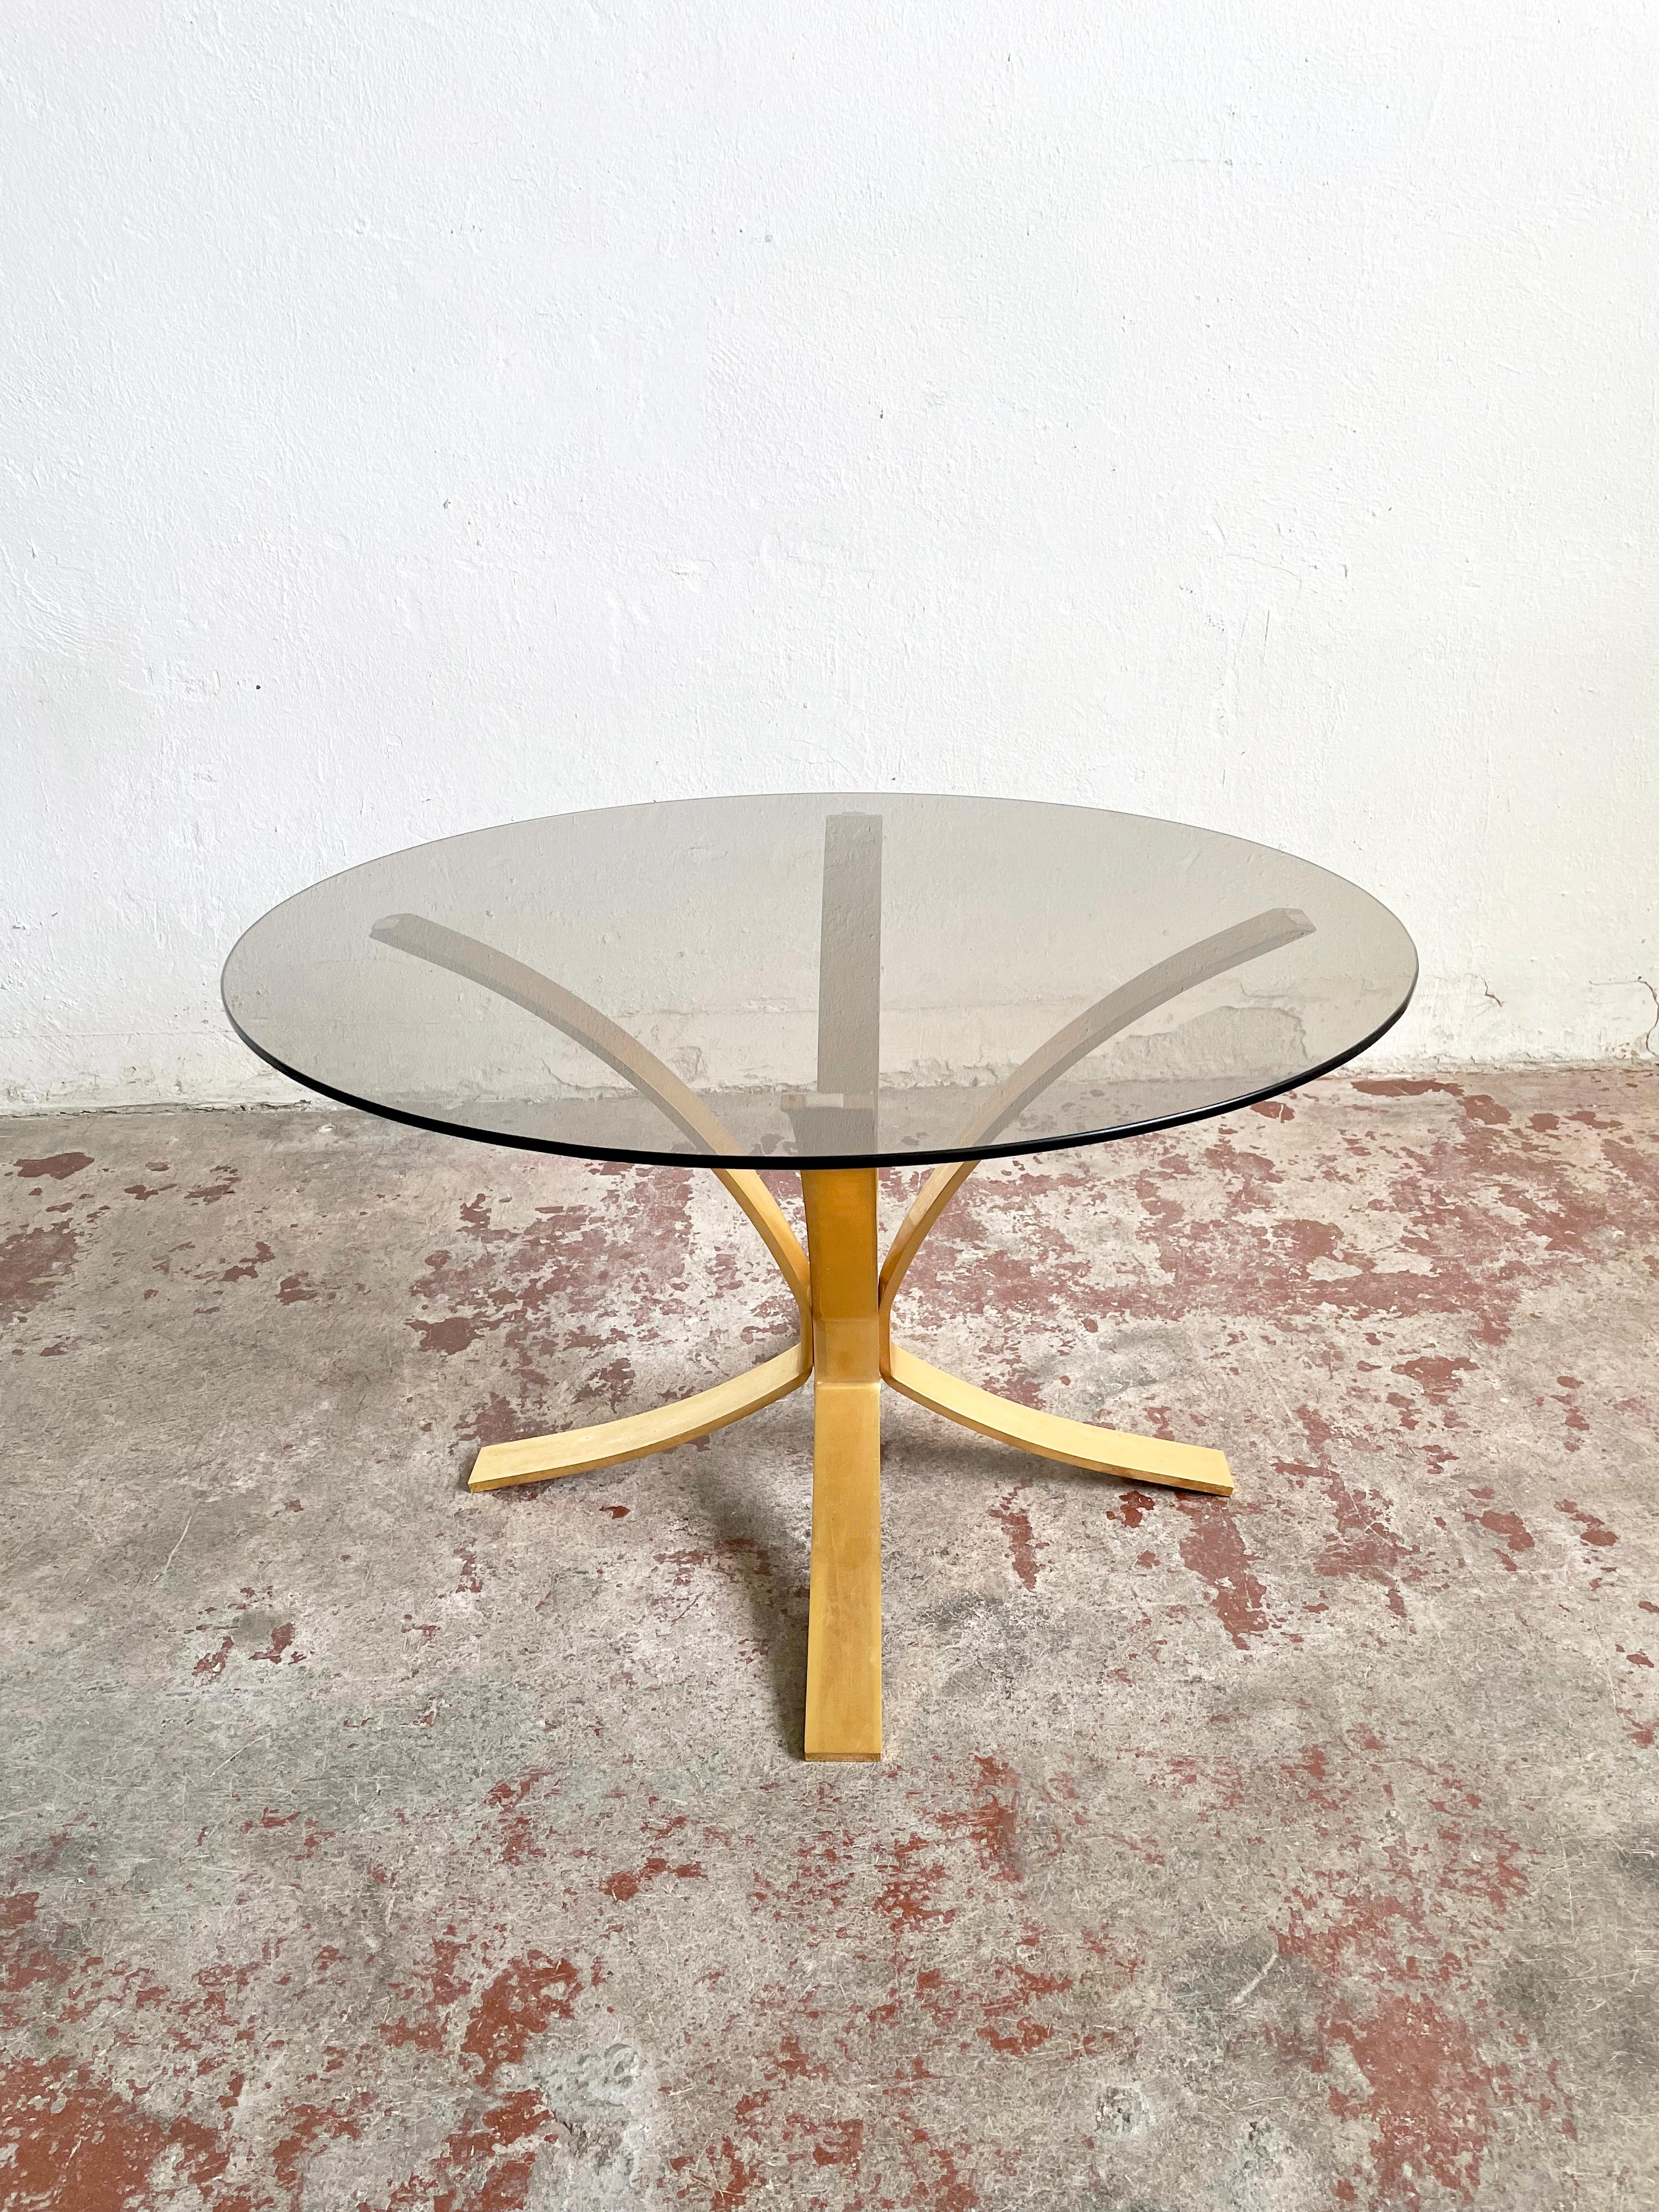 Mid-century coffee table with a heavy brass base in gold color and a round-shaped smoked glass tabletop

Condition: very good vintage condition with small traces of cosmetic wear and vintage patina

Size: 48 x 80 x 80 (H/W/D).